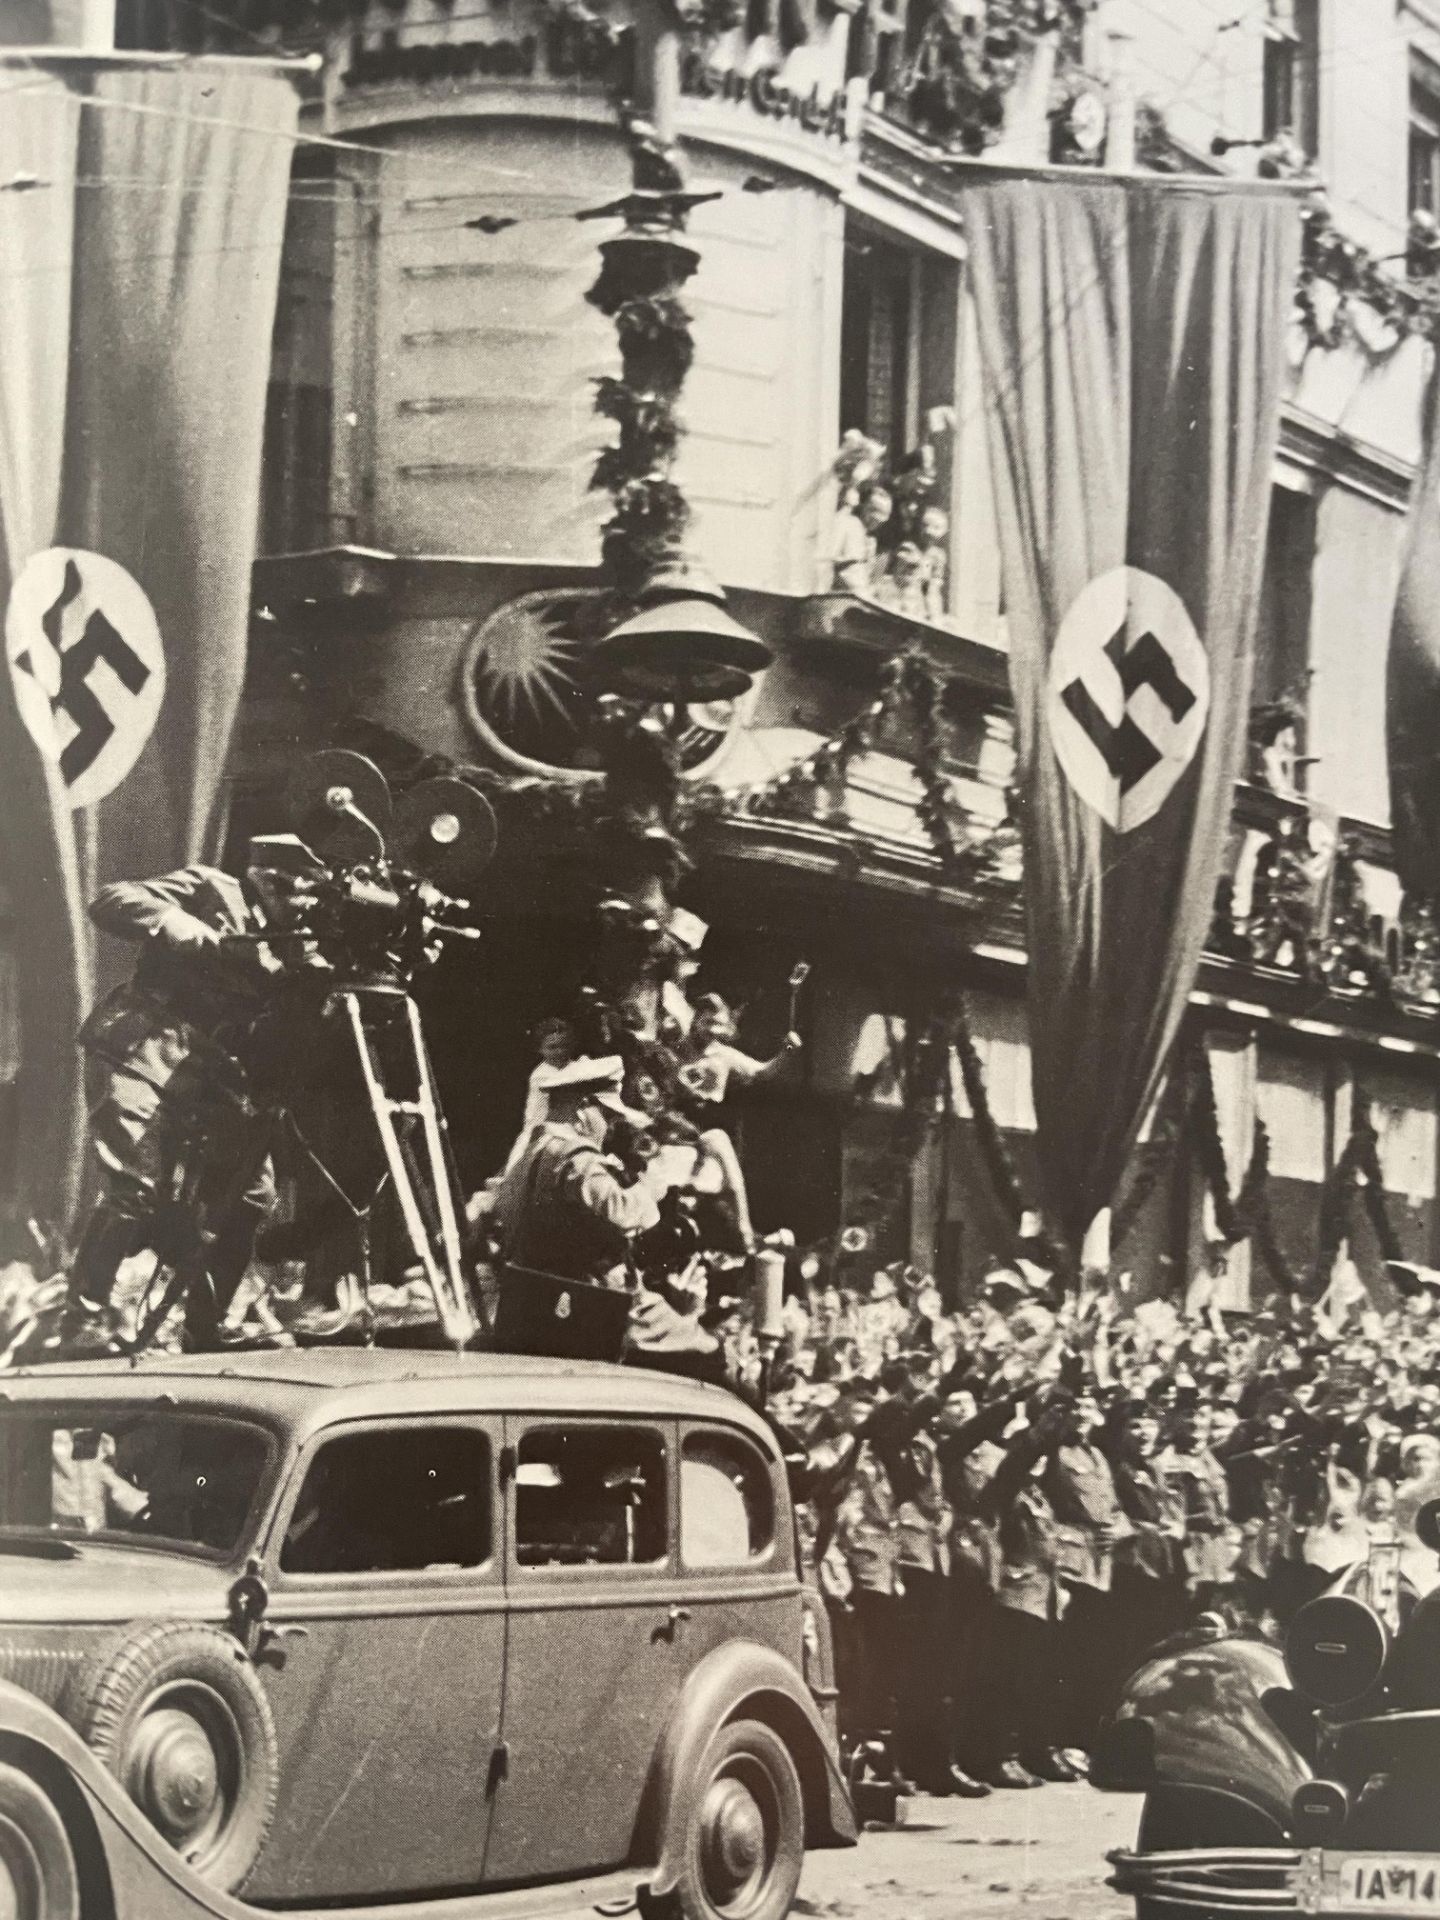 Germany "WWII, Adolf Hitler, Victory Parade" Print - Image 3 of 6